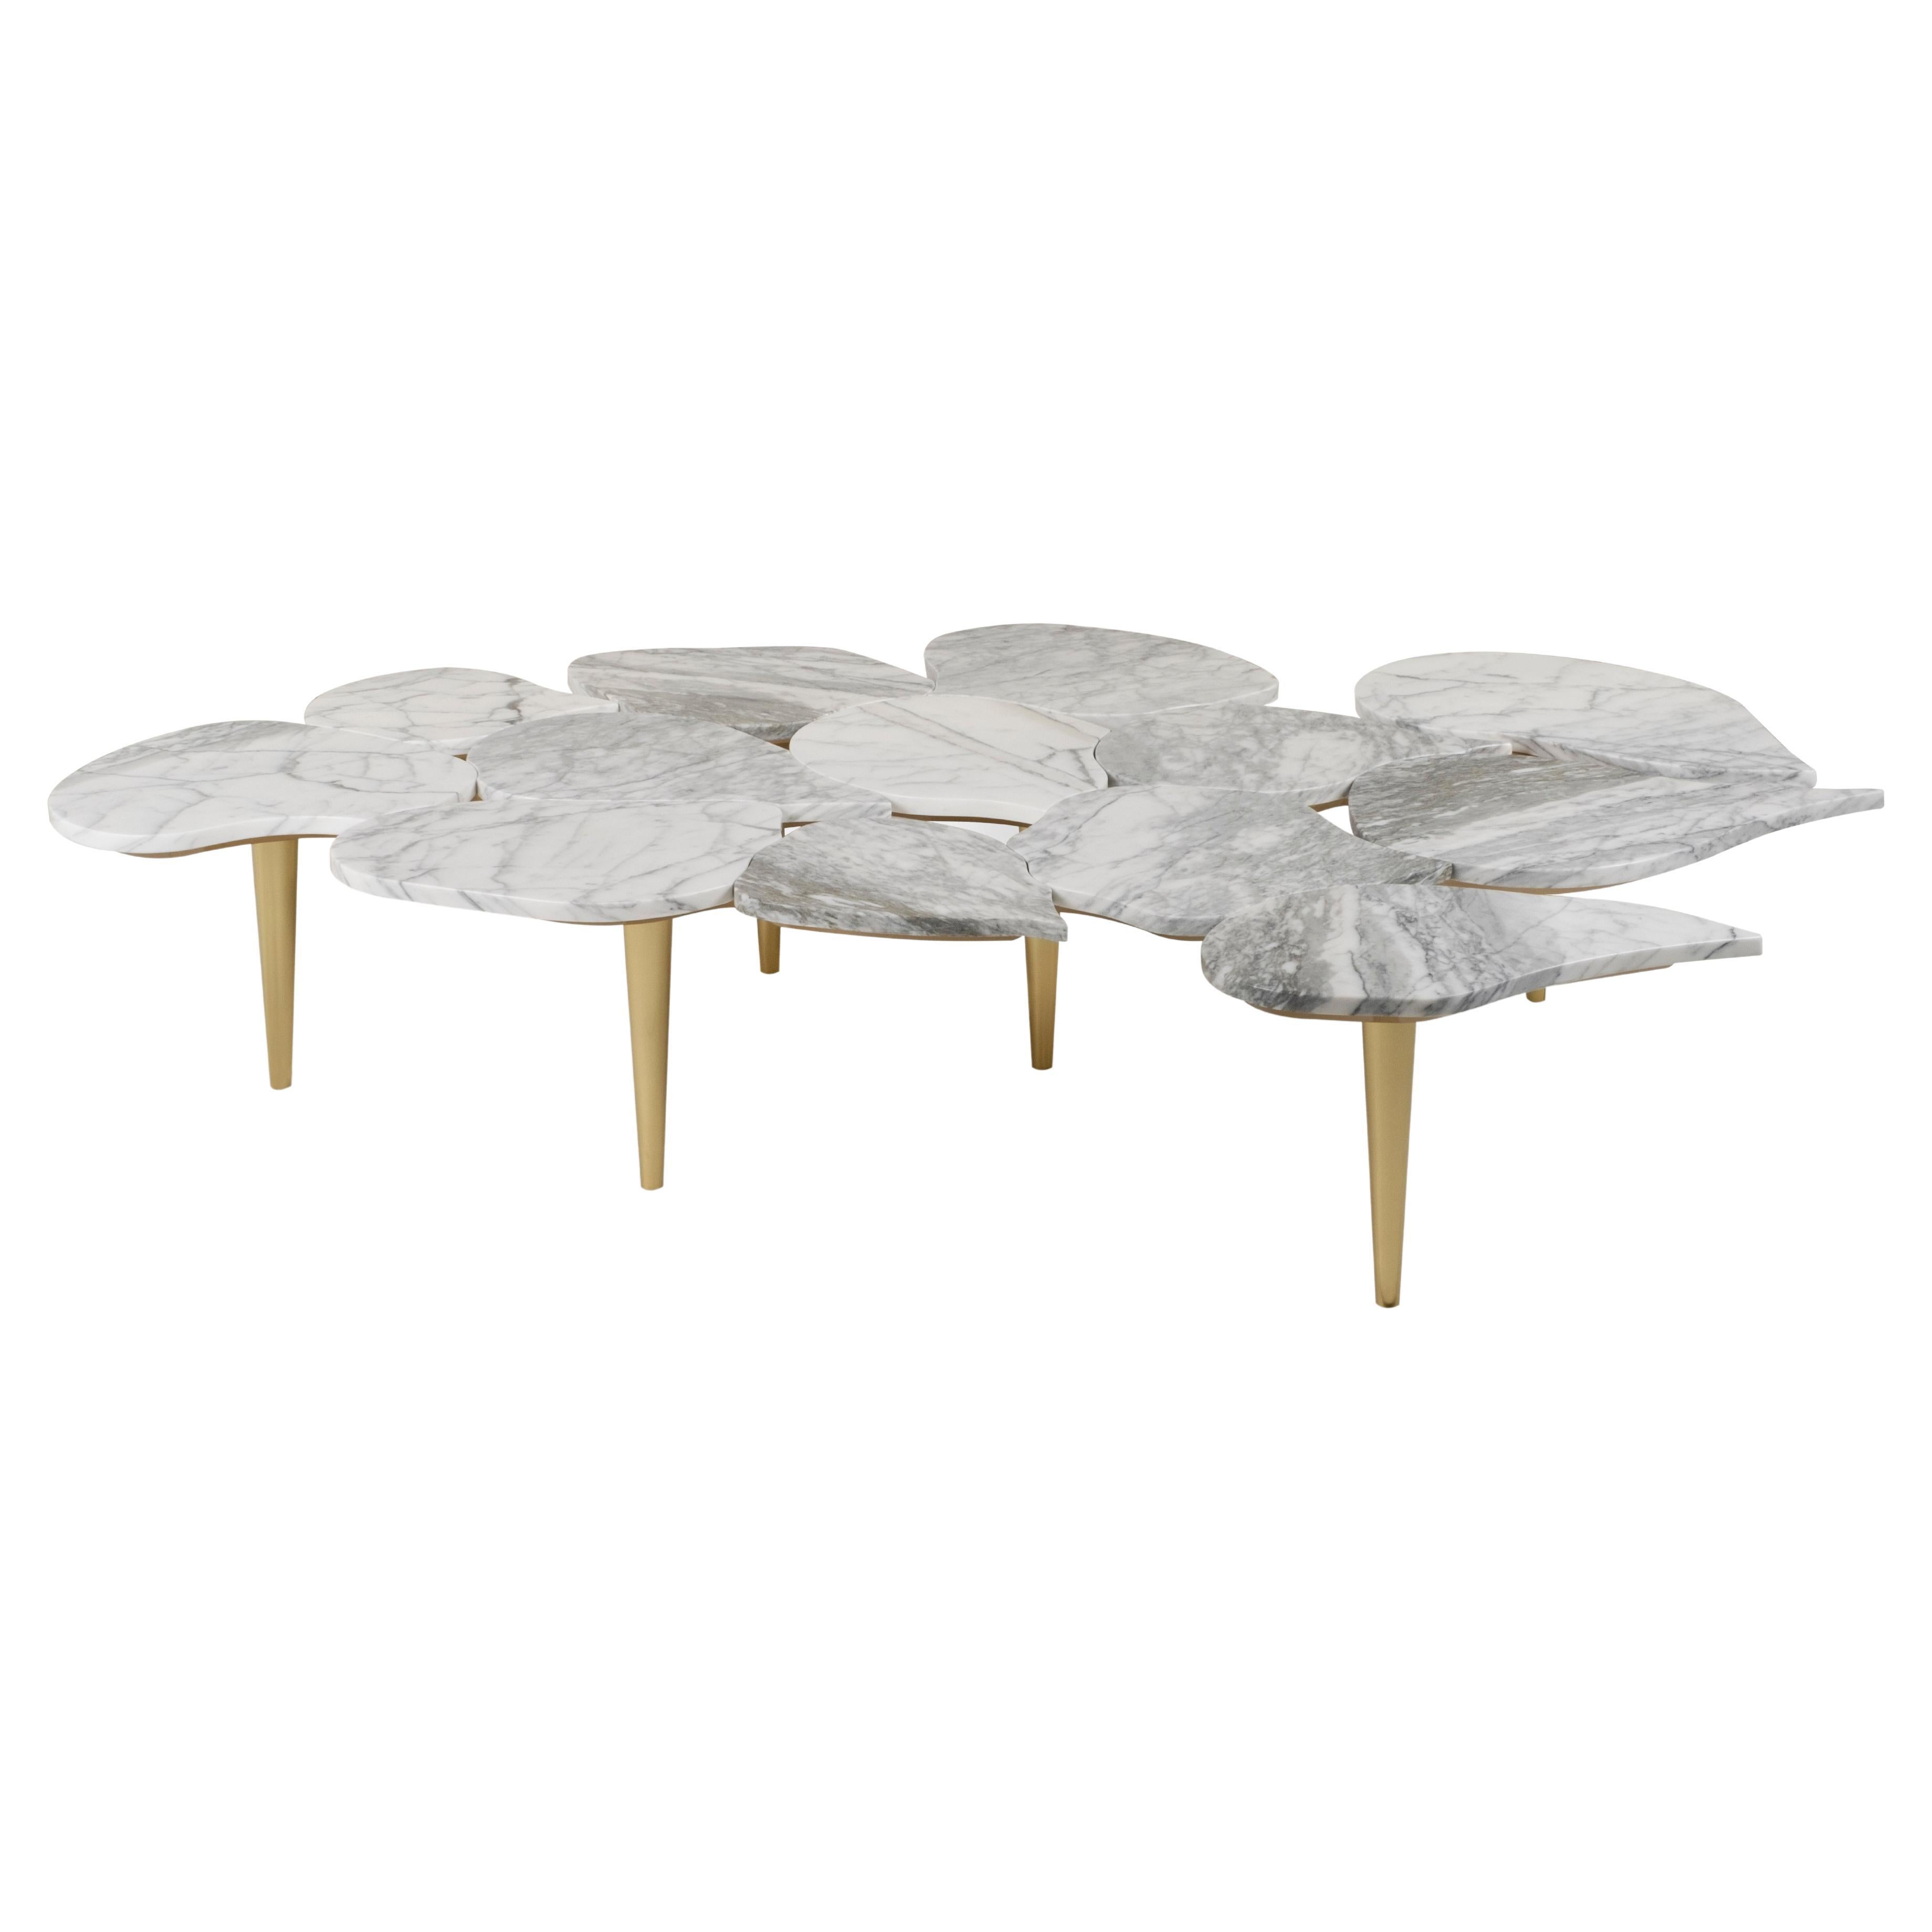 Modern Infinity Coffee Table in Carrara Bianco Marble Handcrafted by Greenapple